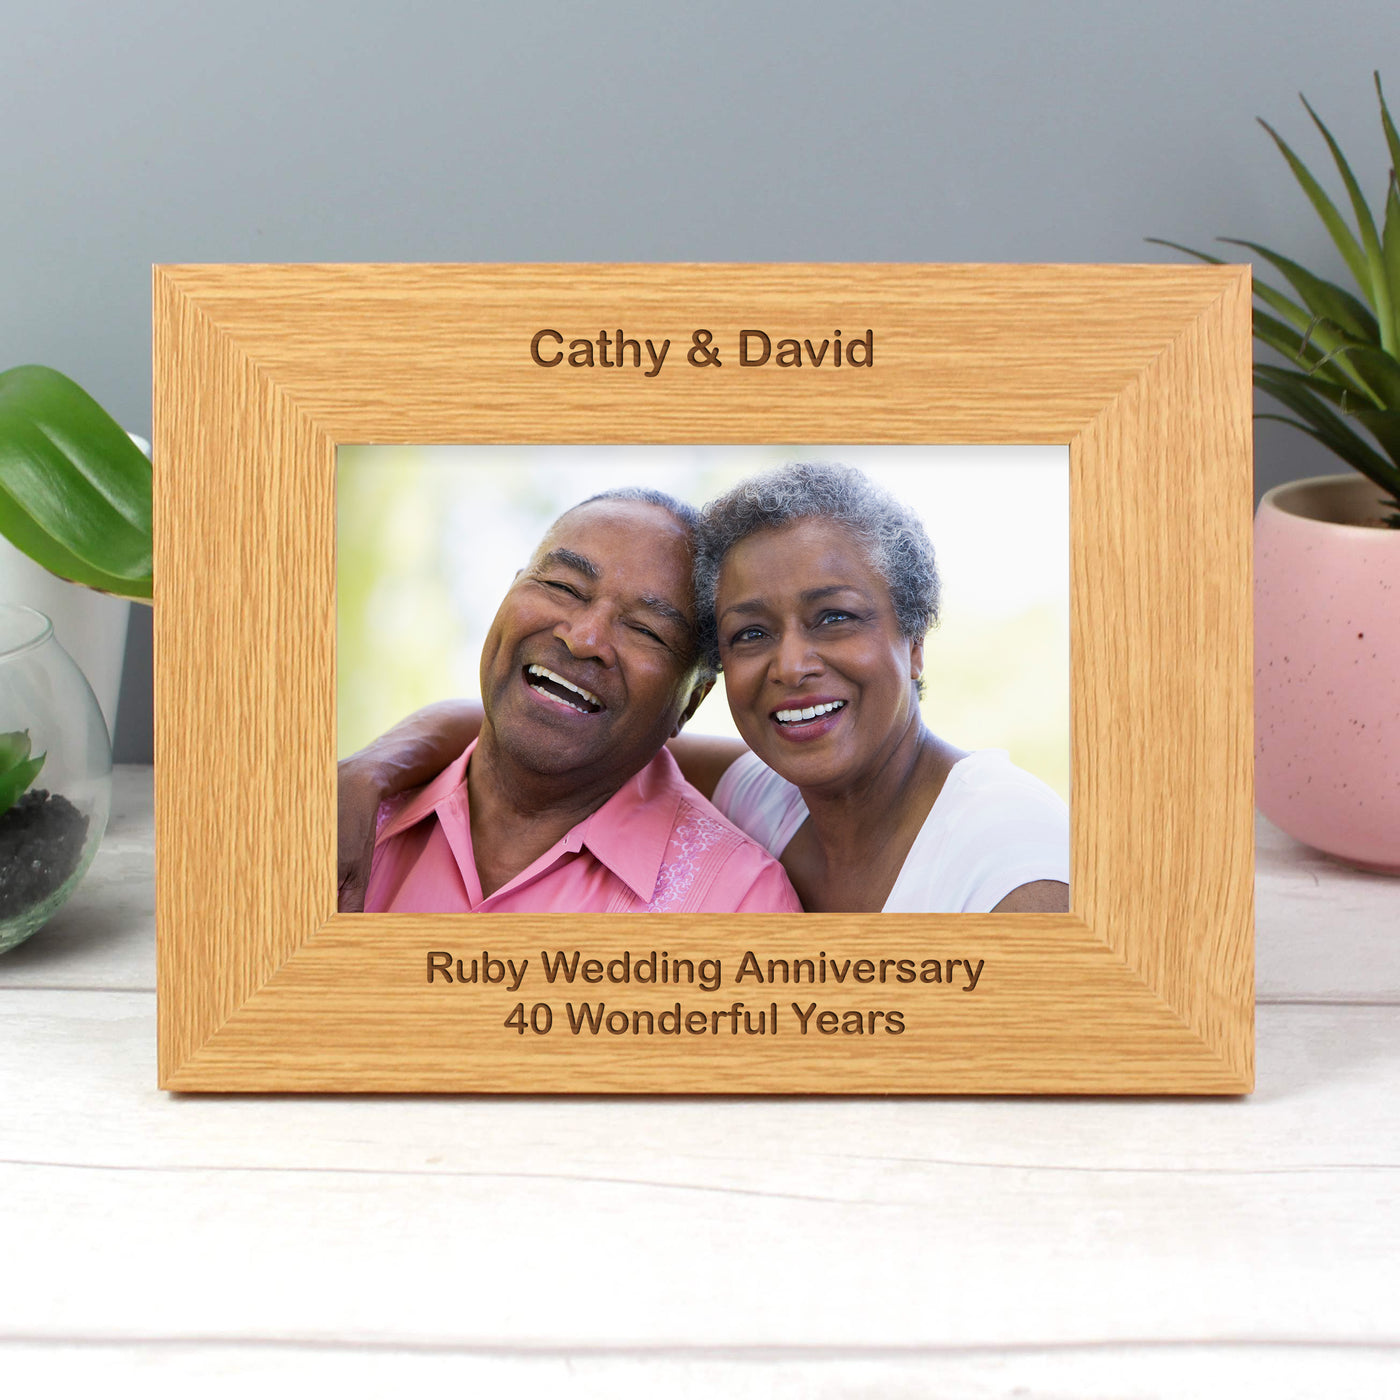 Personalised 'Meals and Memories' Round Chopping Board